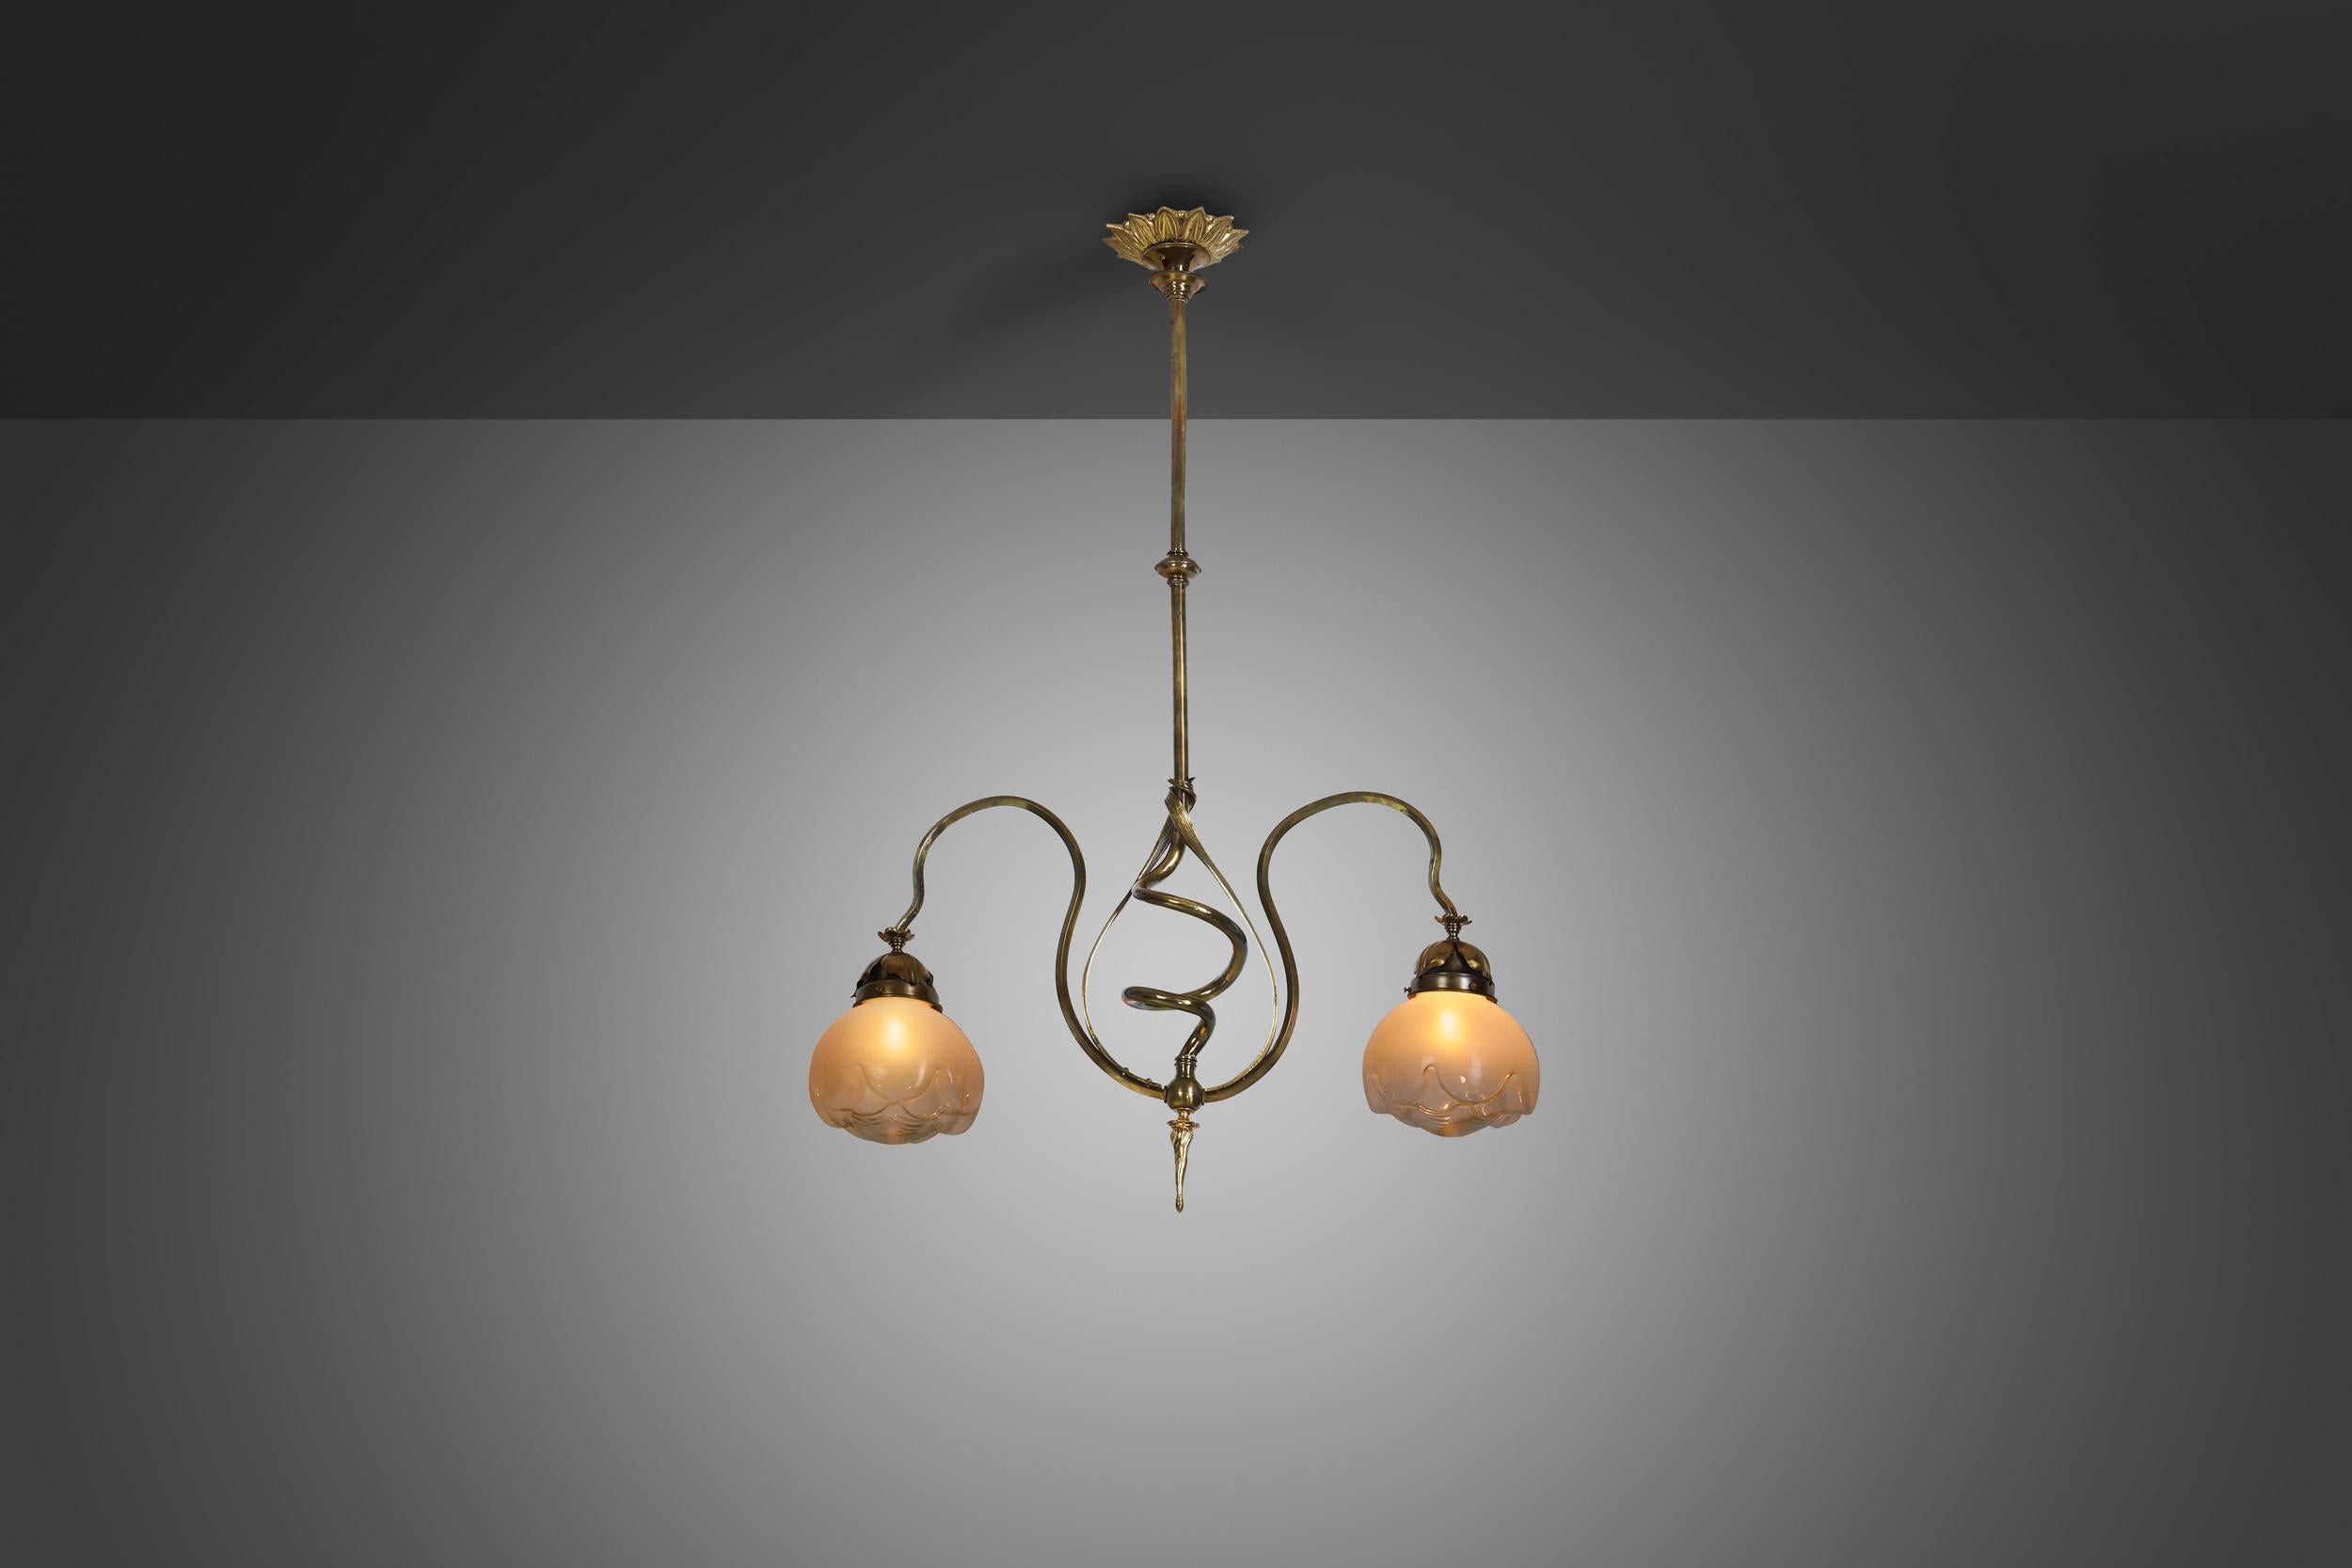 20th Century Jugend Ceiling Lamp in Patinated Brass and Glass, Europe early 20th century For Sale